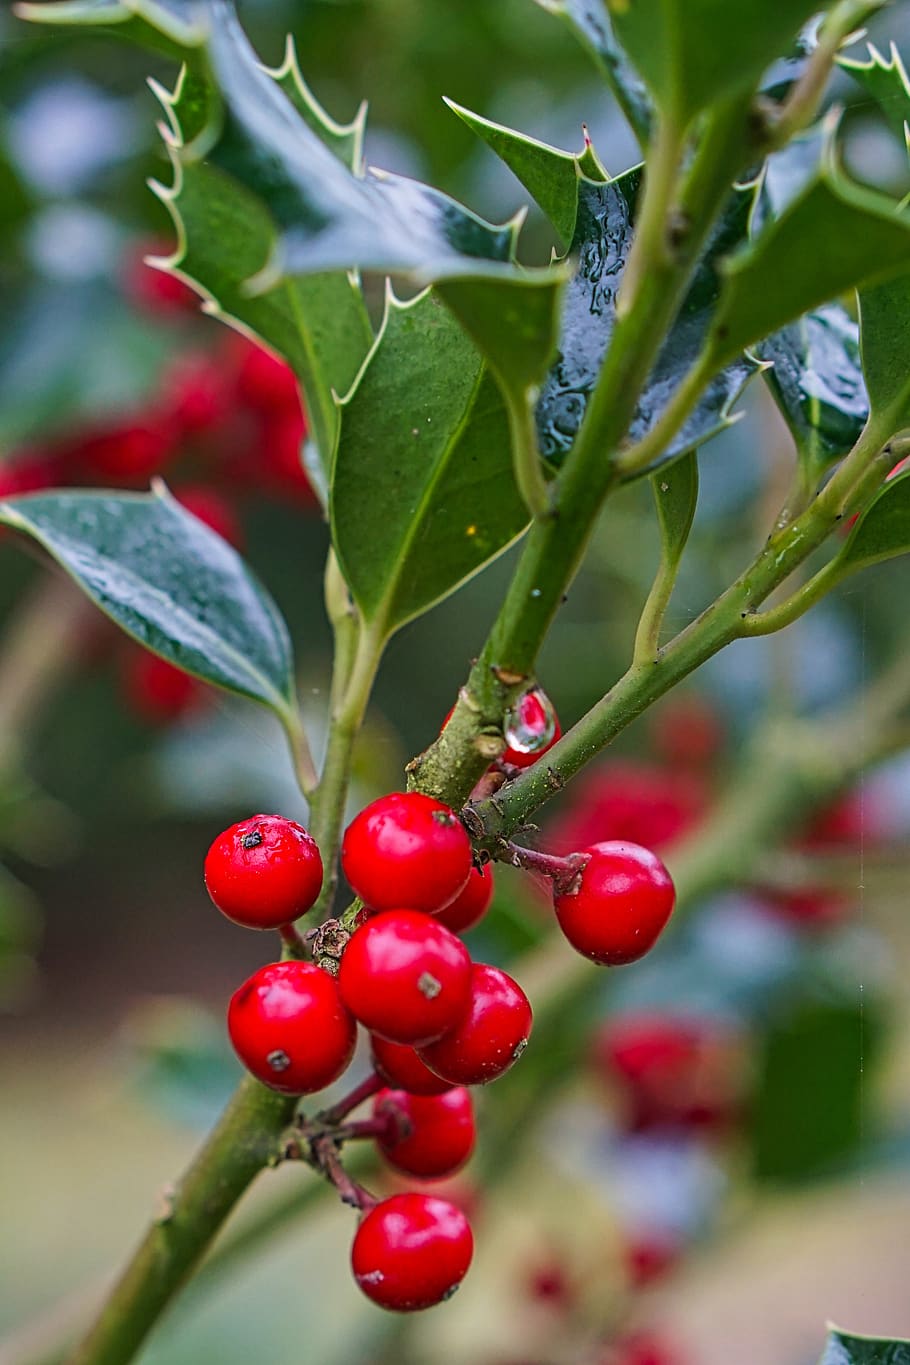 holly, plant, always green plants, berry red, red, green, evergreen, wet, rain, nature